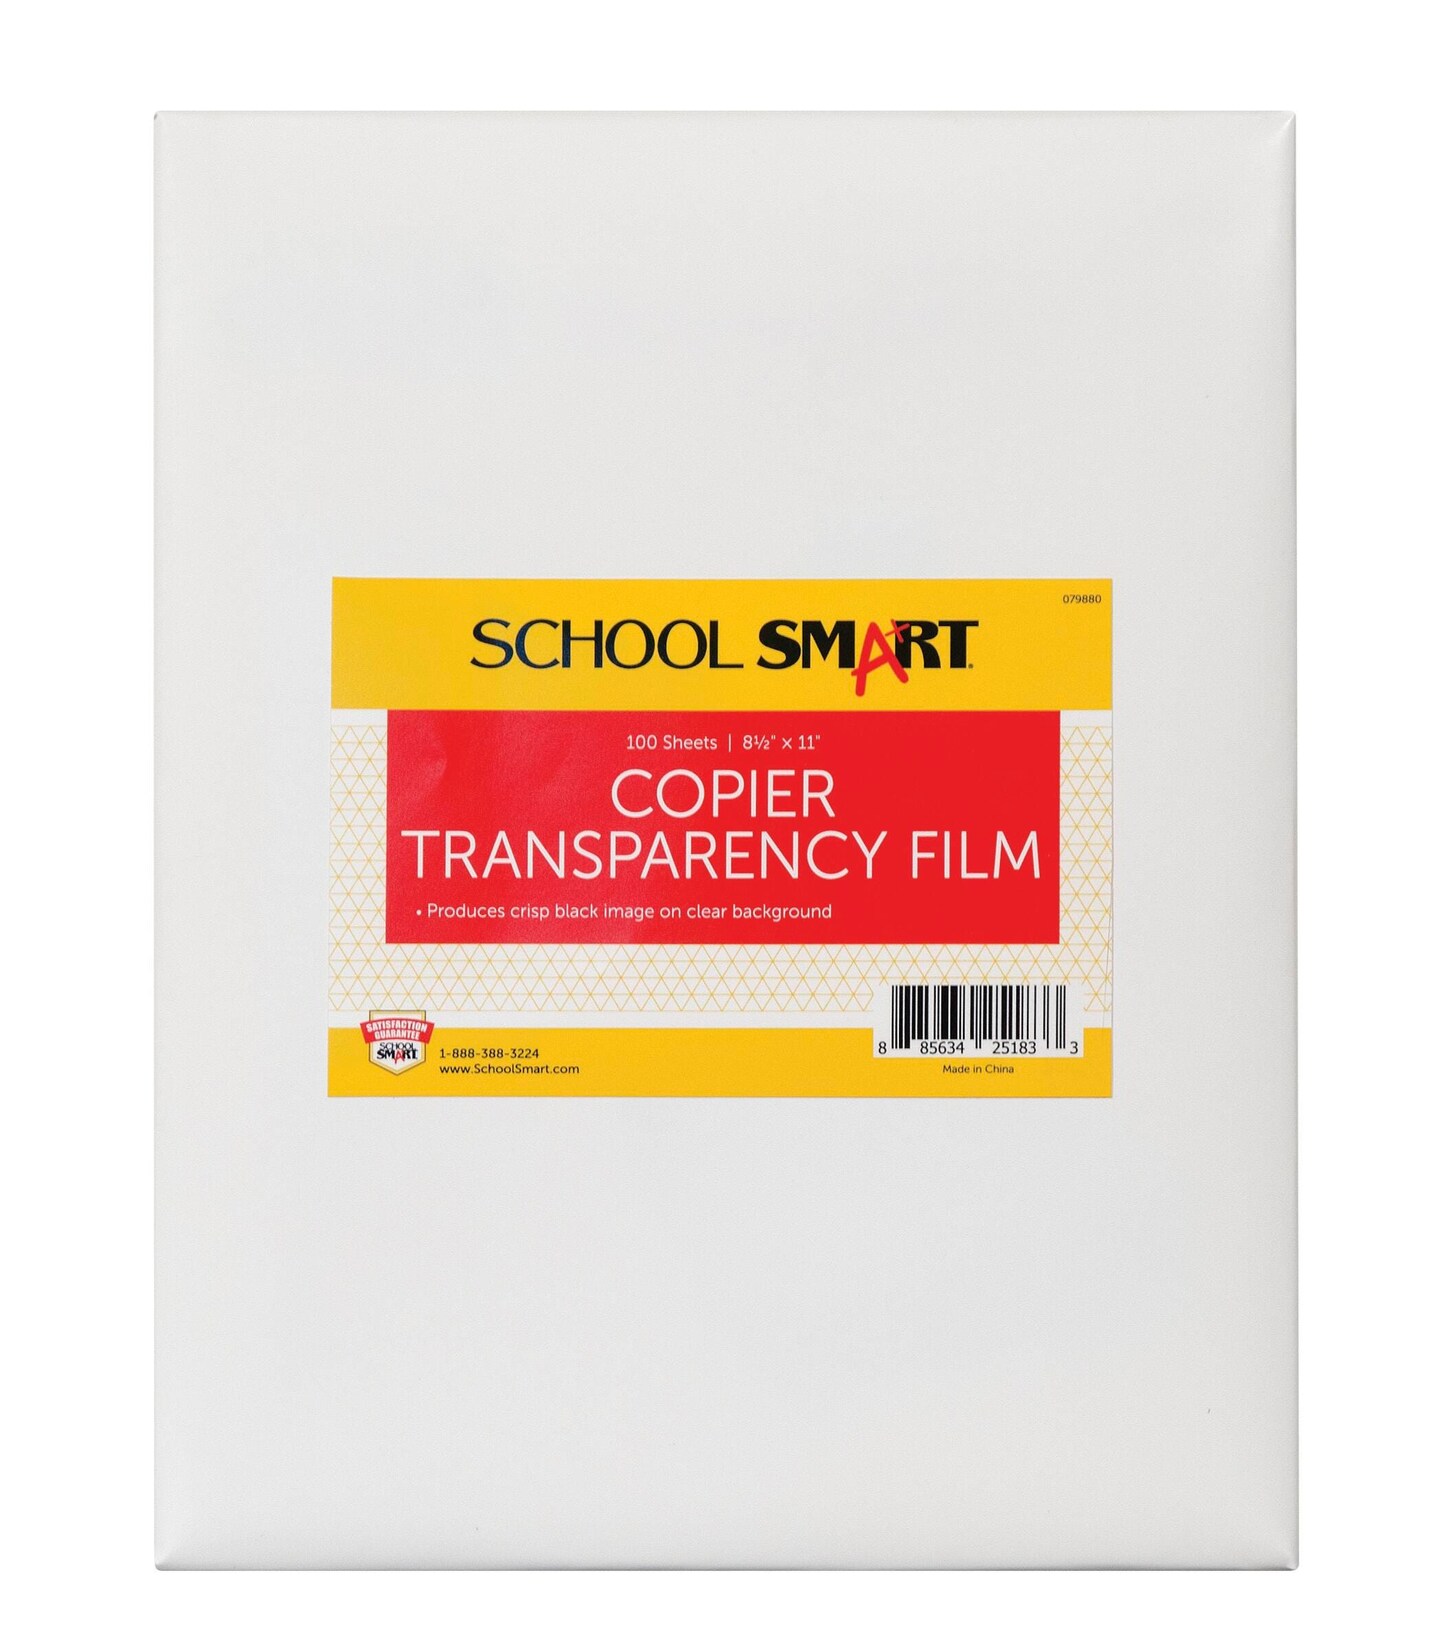 School Smart Copier Transparency Film without Sensing Strip, 8-1/2 x 11 Inches, Clear, Pack of 100